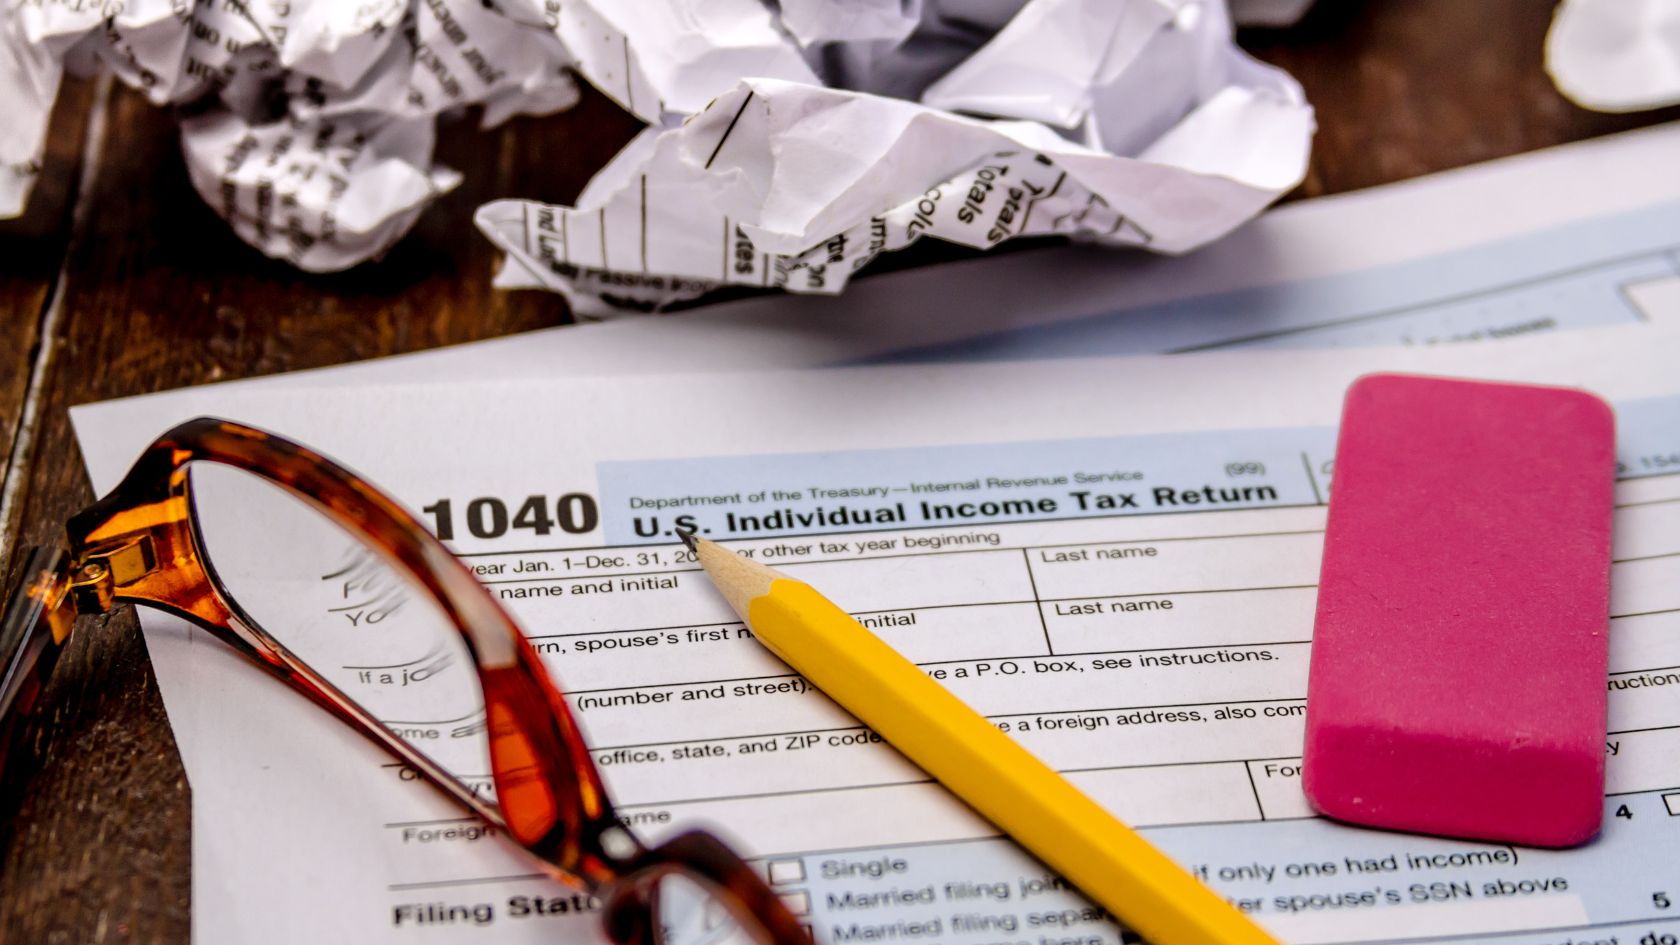 February is a Great Time to File Your Taxes